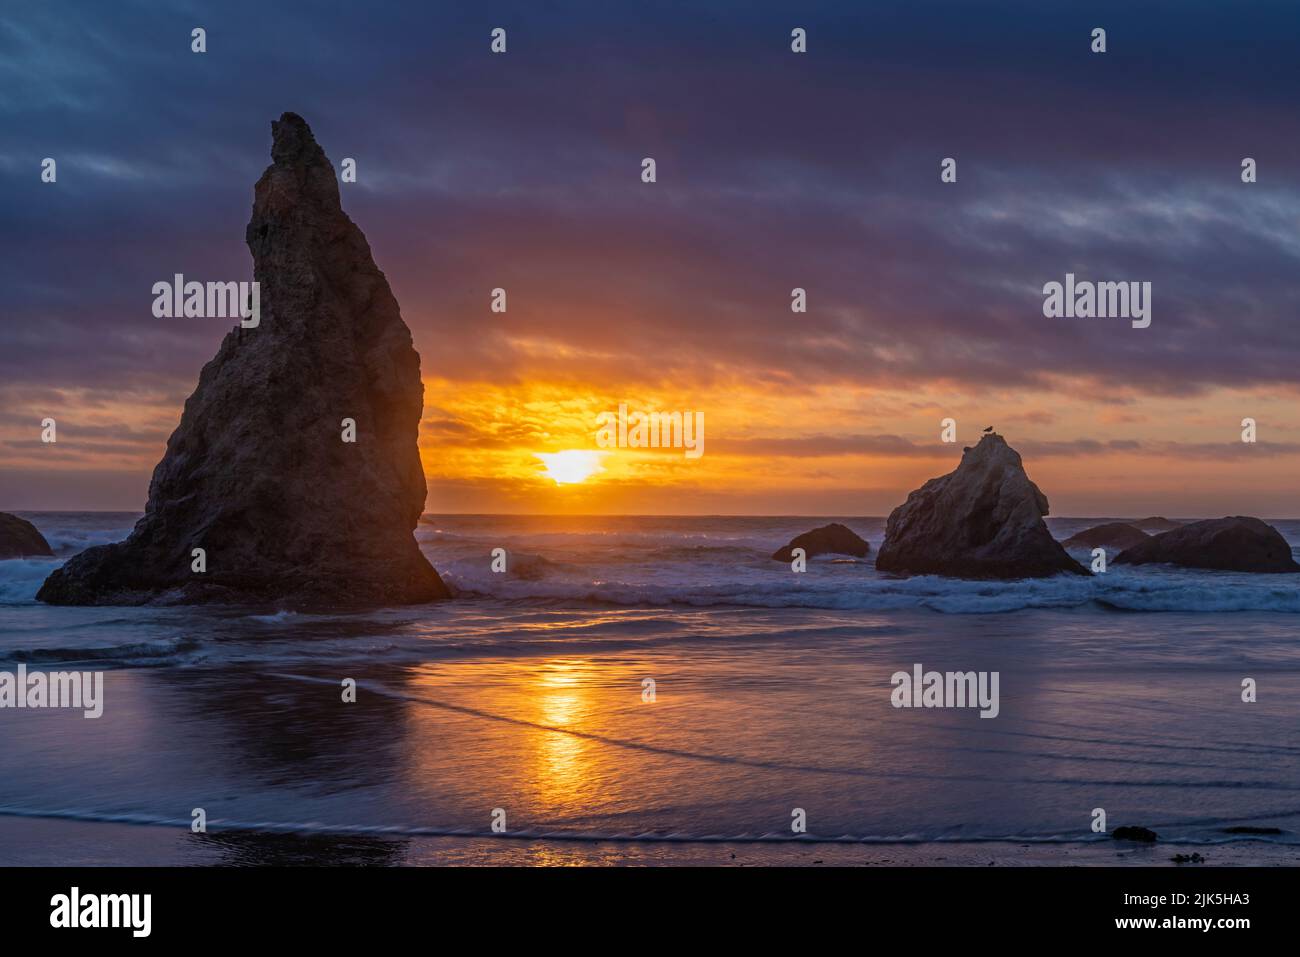 Sun and sky reflected on Bandon Beach at sunset with sea stacks in silhouette on the Pacific Coast in Bandon, Oregon. Stock Photo